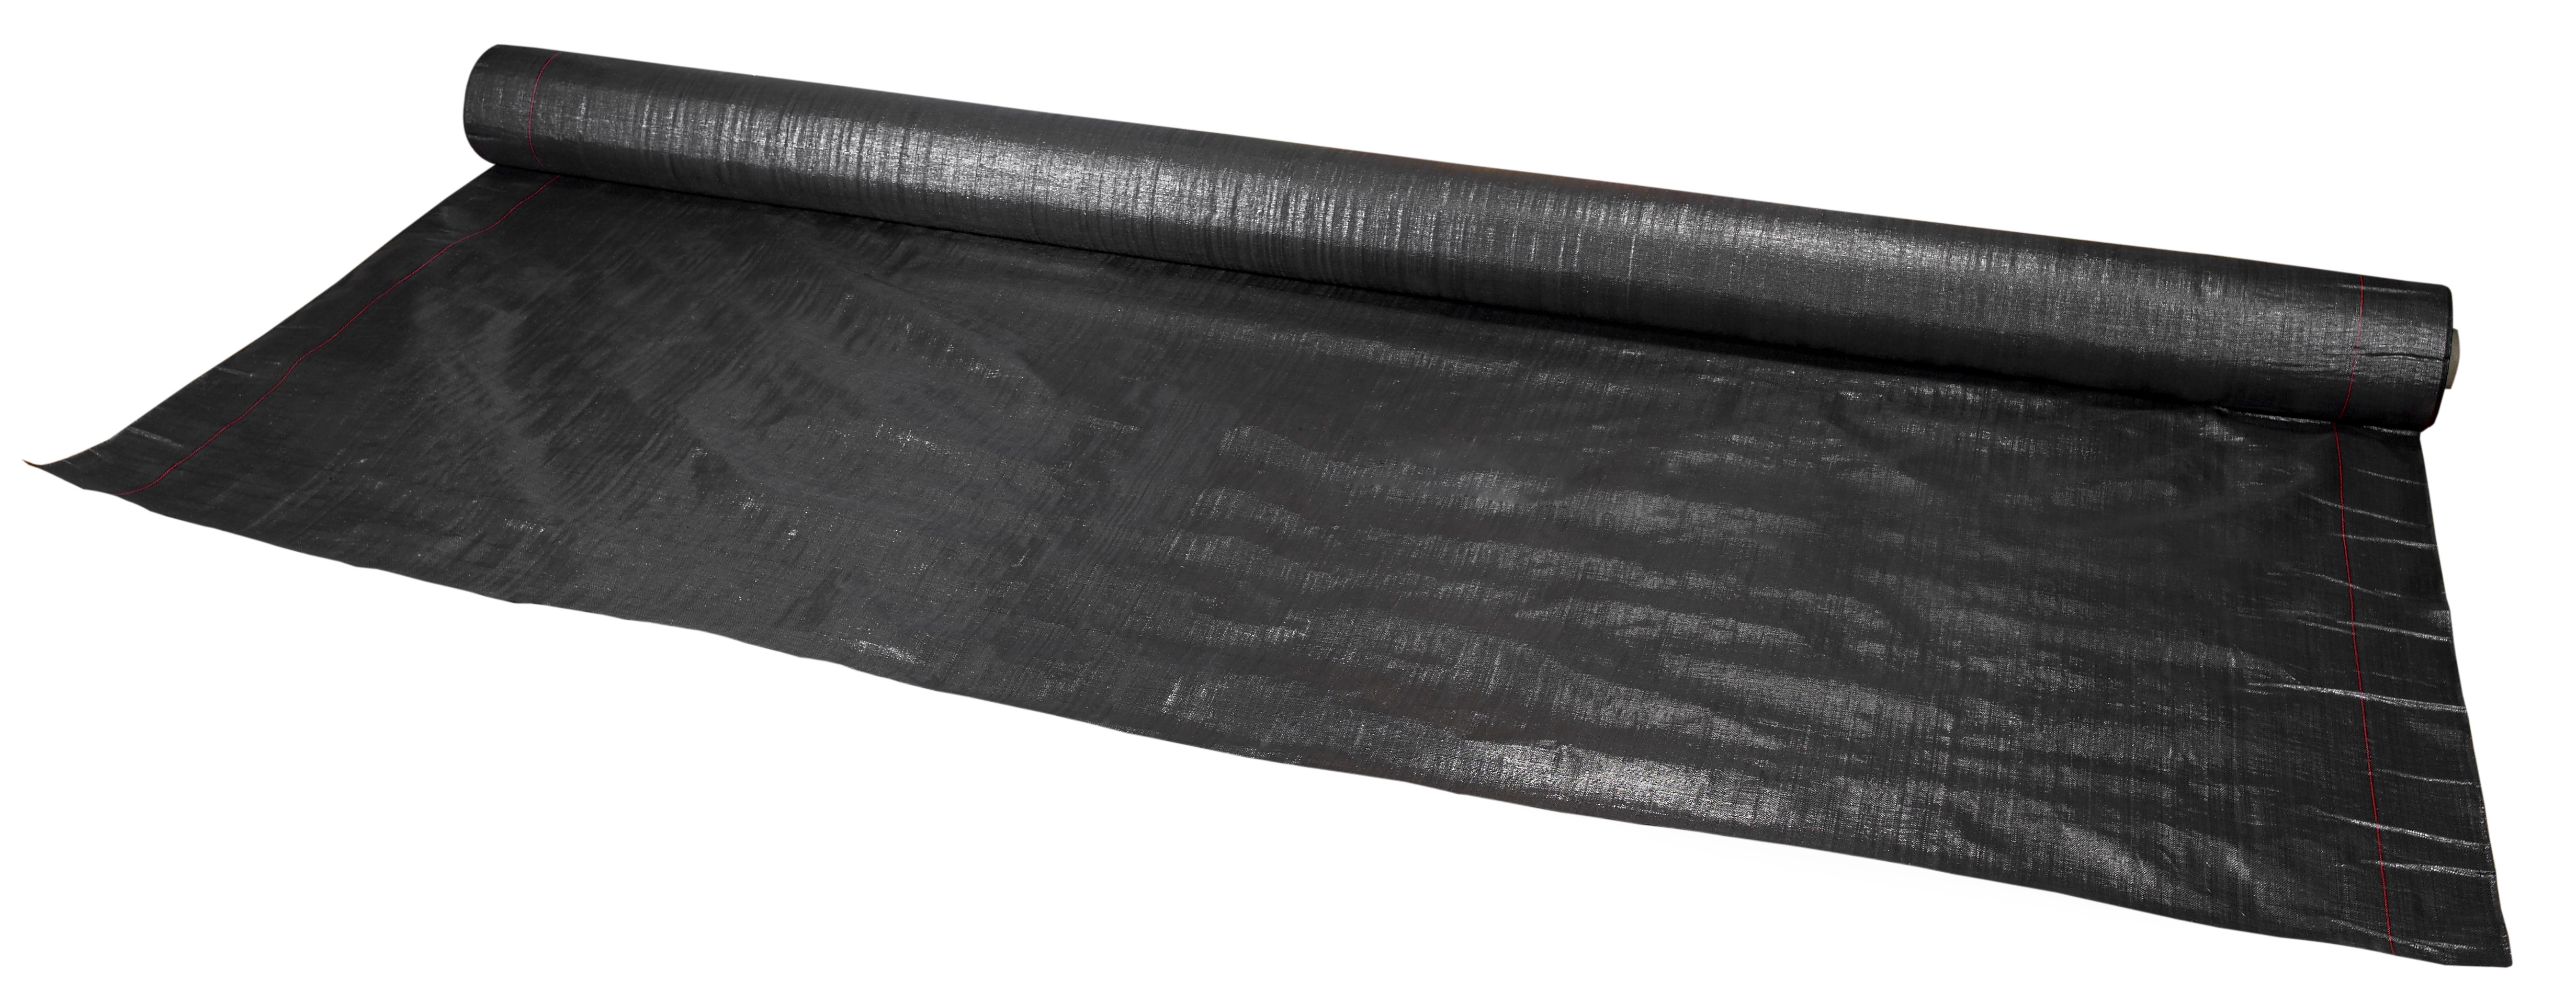 315-125-360, Woven Geotextile Fabric, 315 lb., 360 ft Length X 12-1/2 ft Width, Mega Safety Mart